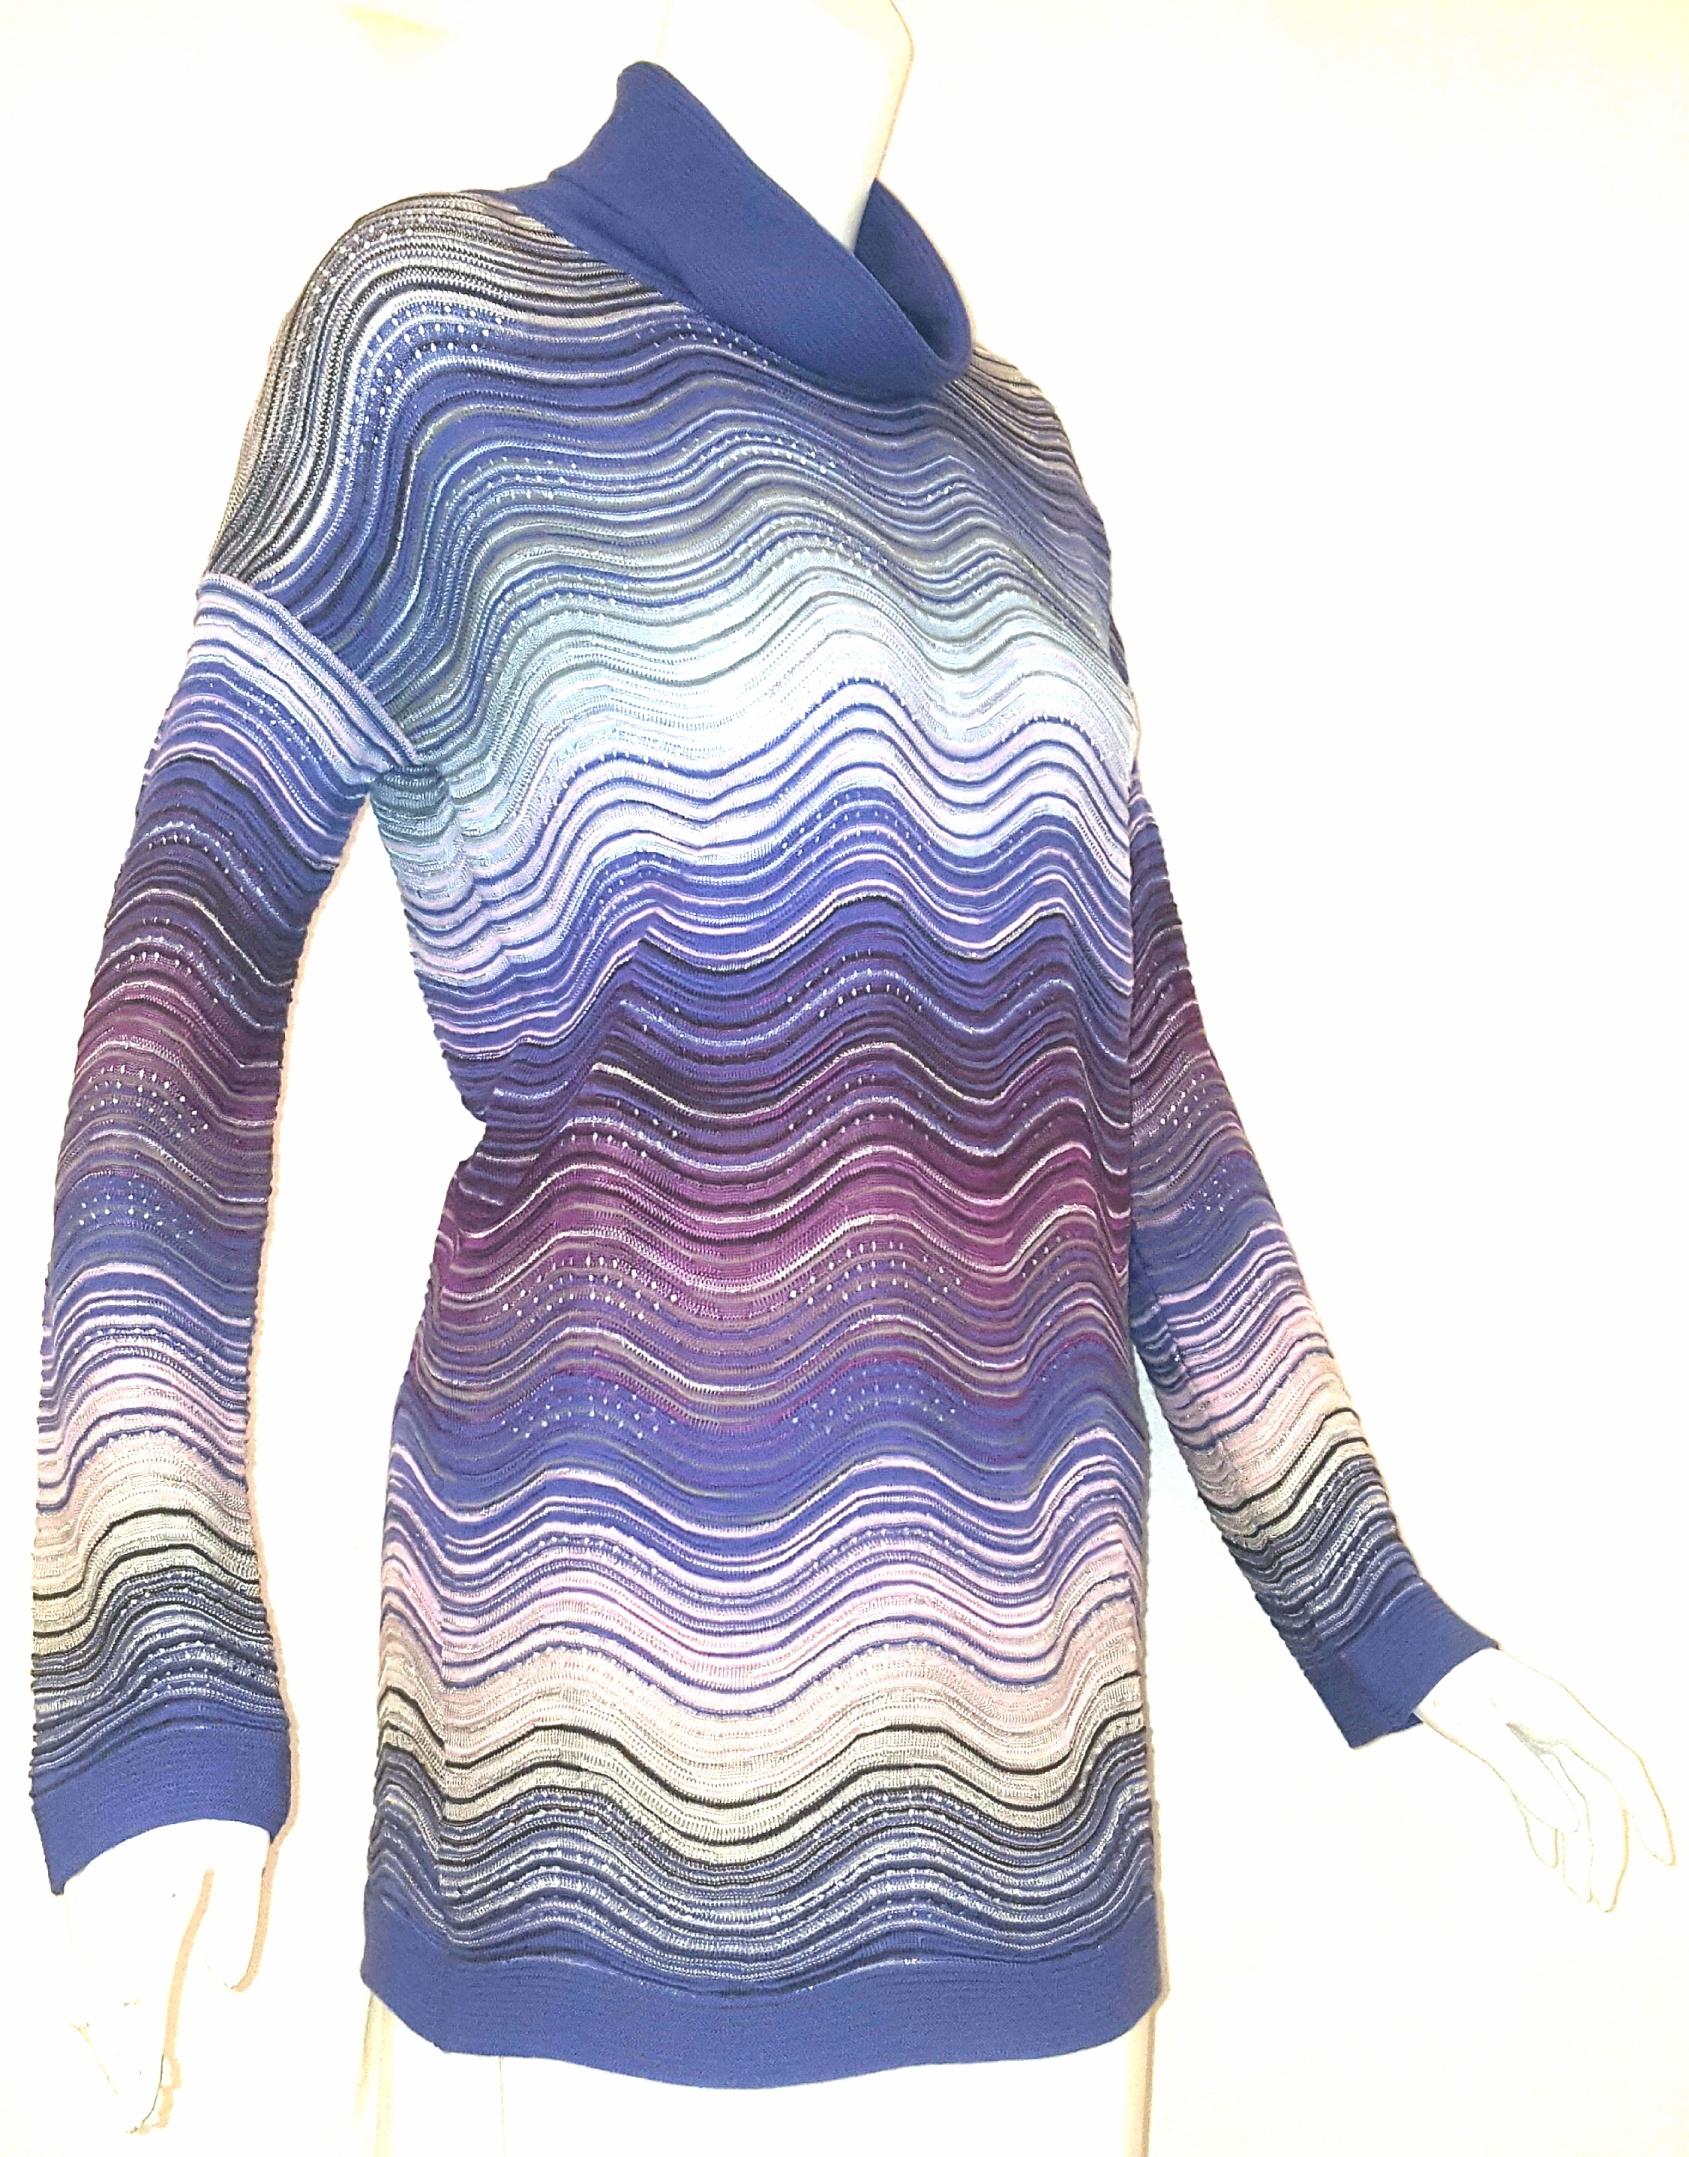 Missoni textured metallic knit is unabashedly feminine and celebrates a woman's natural curves.  Features dramatic horizontal ribbing on front and back.  Multicolor wave design stripes are striking in this turtleneck pullover with ribbed hem.  